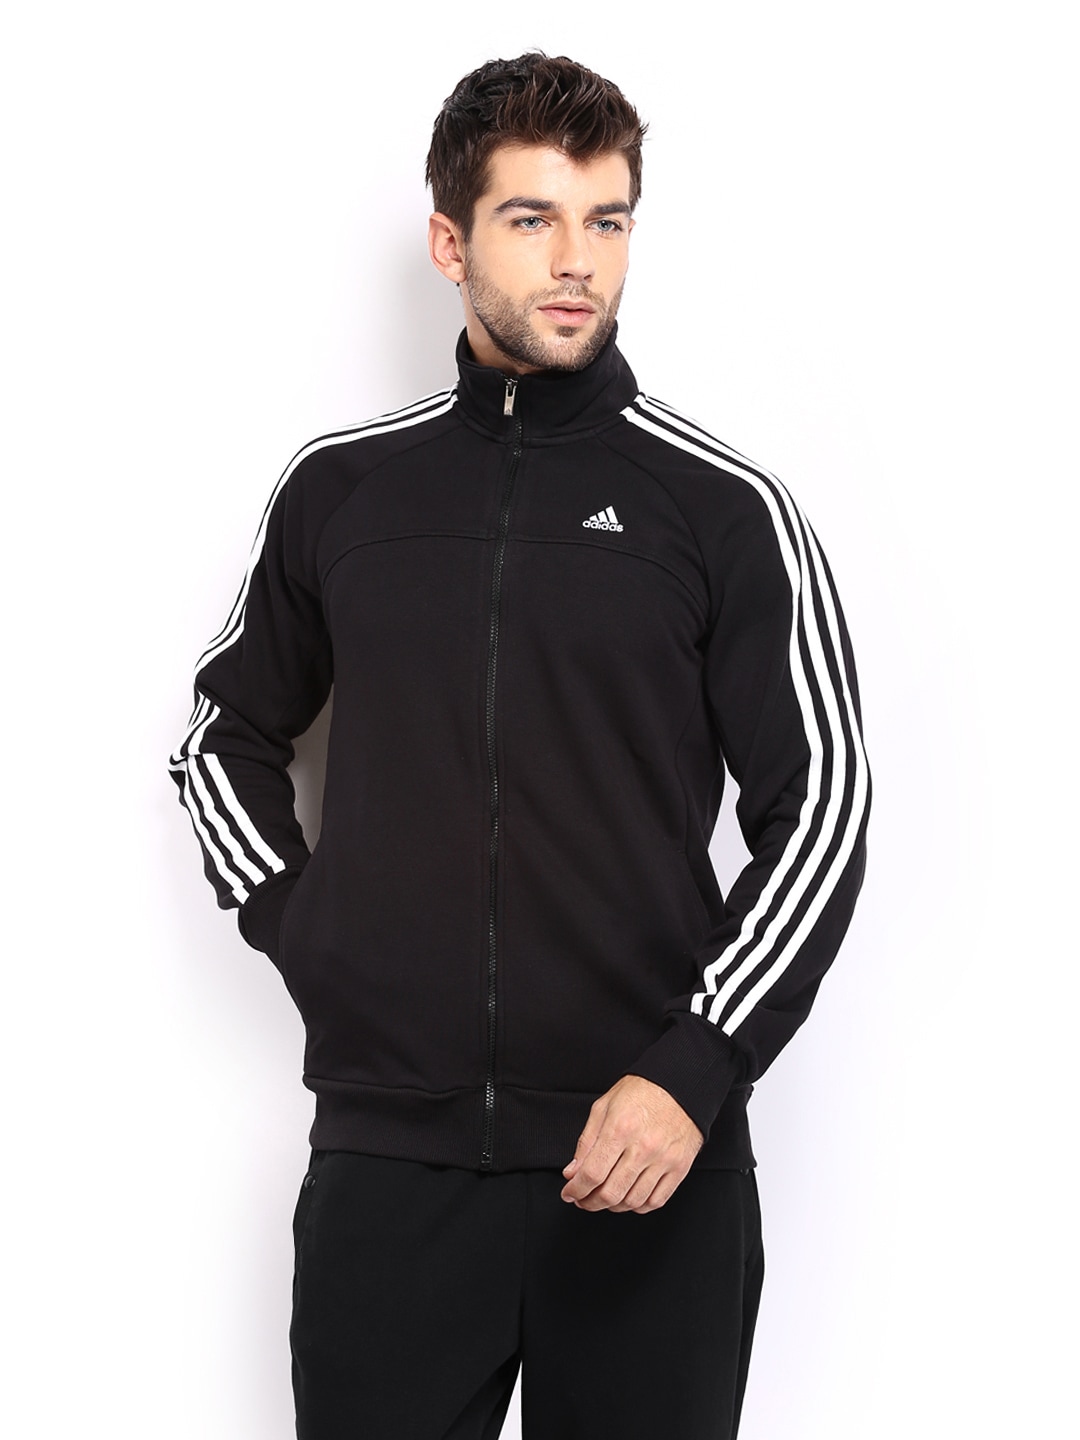 jacket for men adidas black - jackets in my home